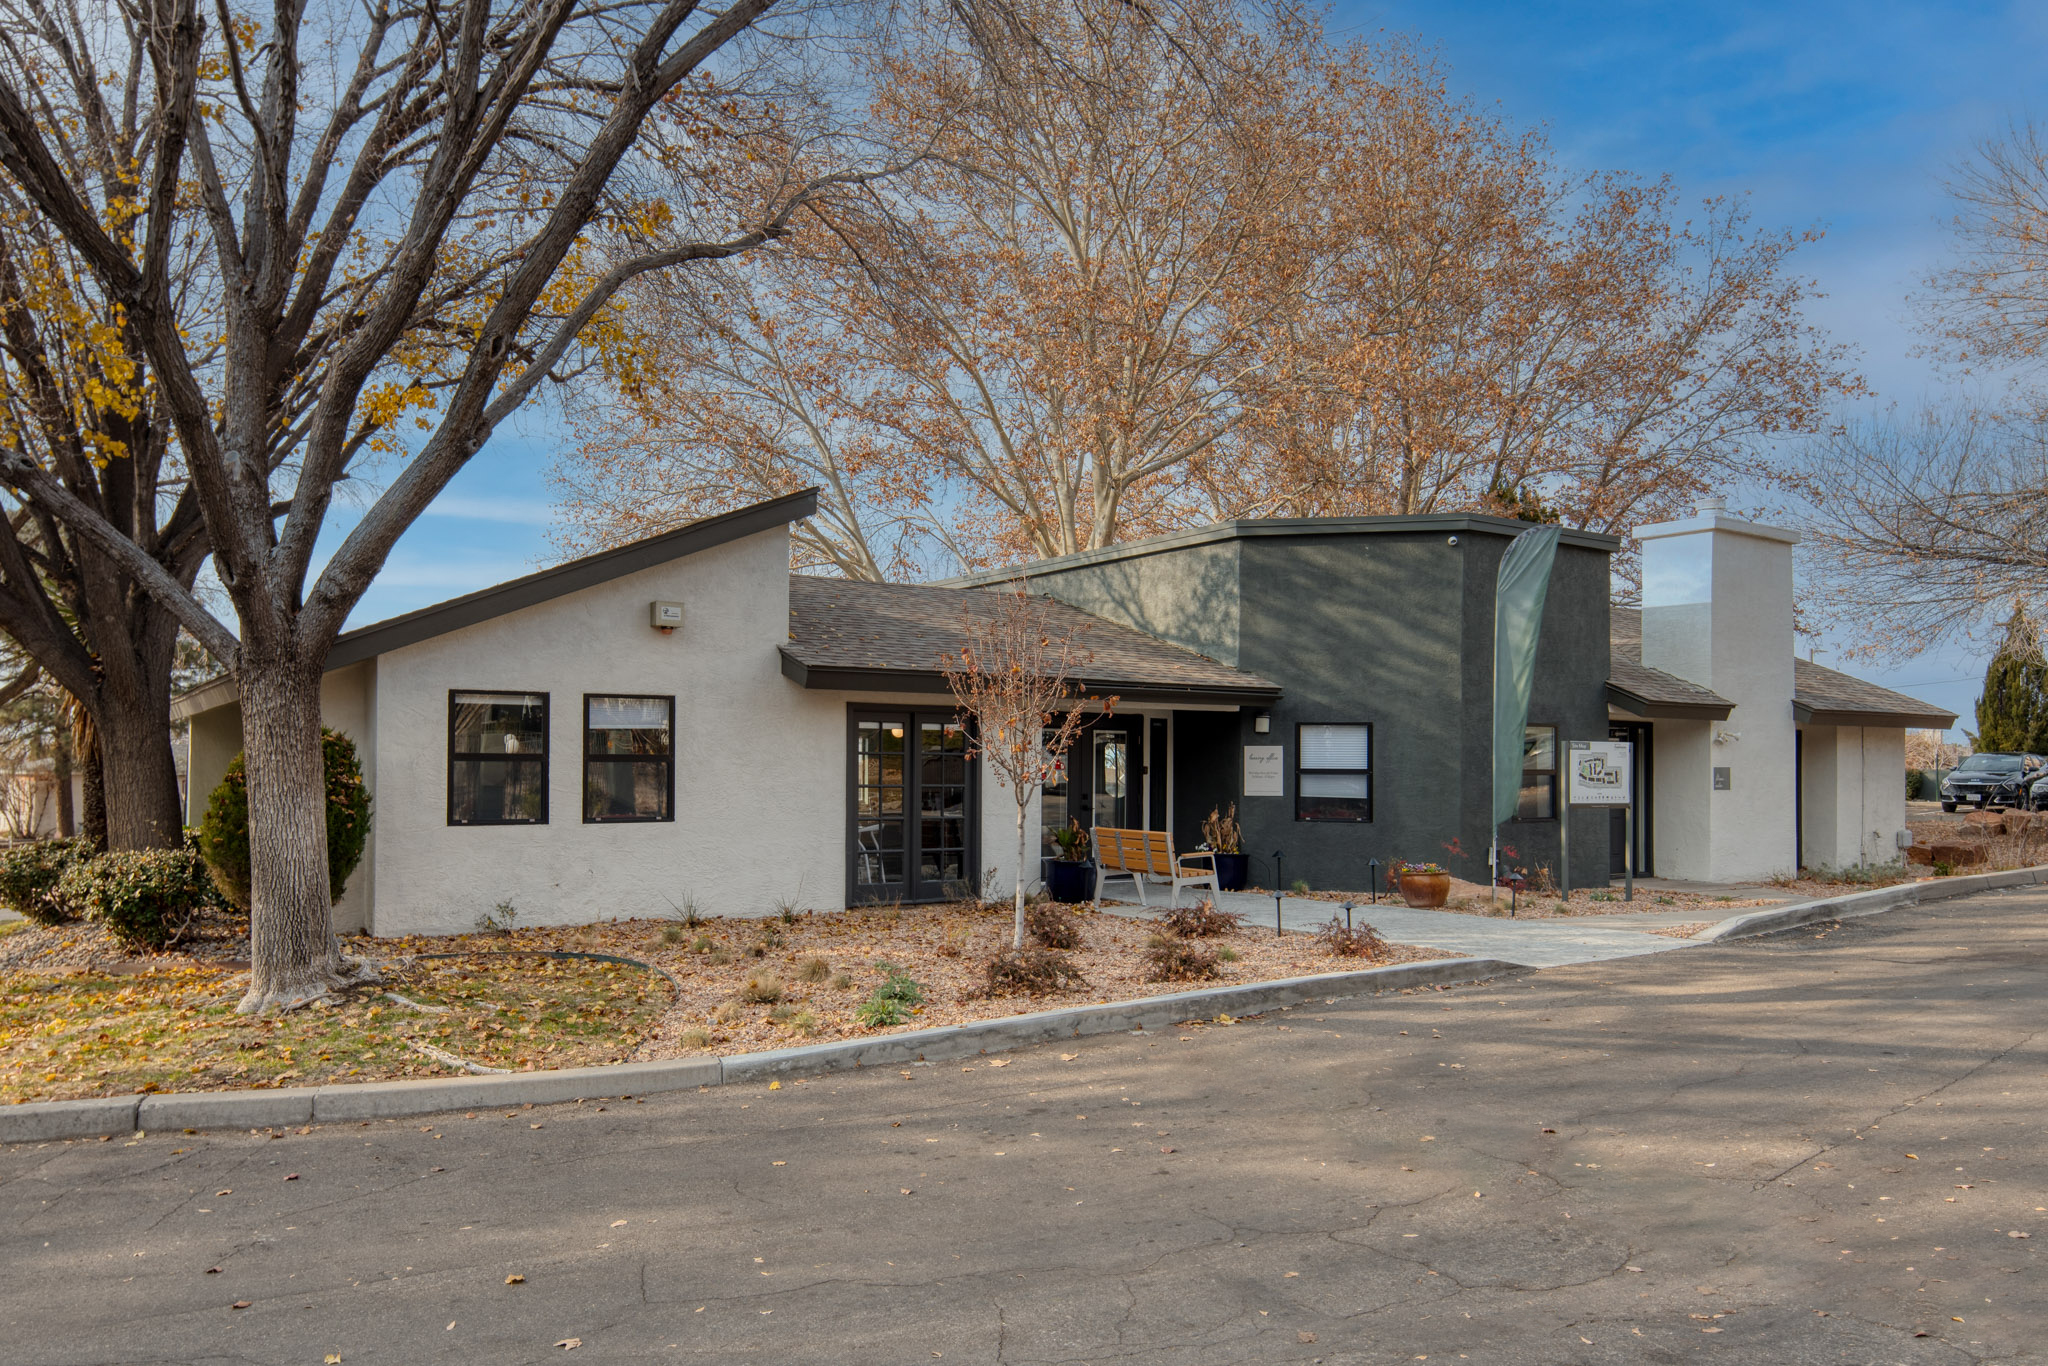 Exterior view of Leasing Office at Treehouse in Albuquerque, New Mexico